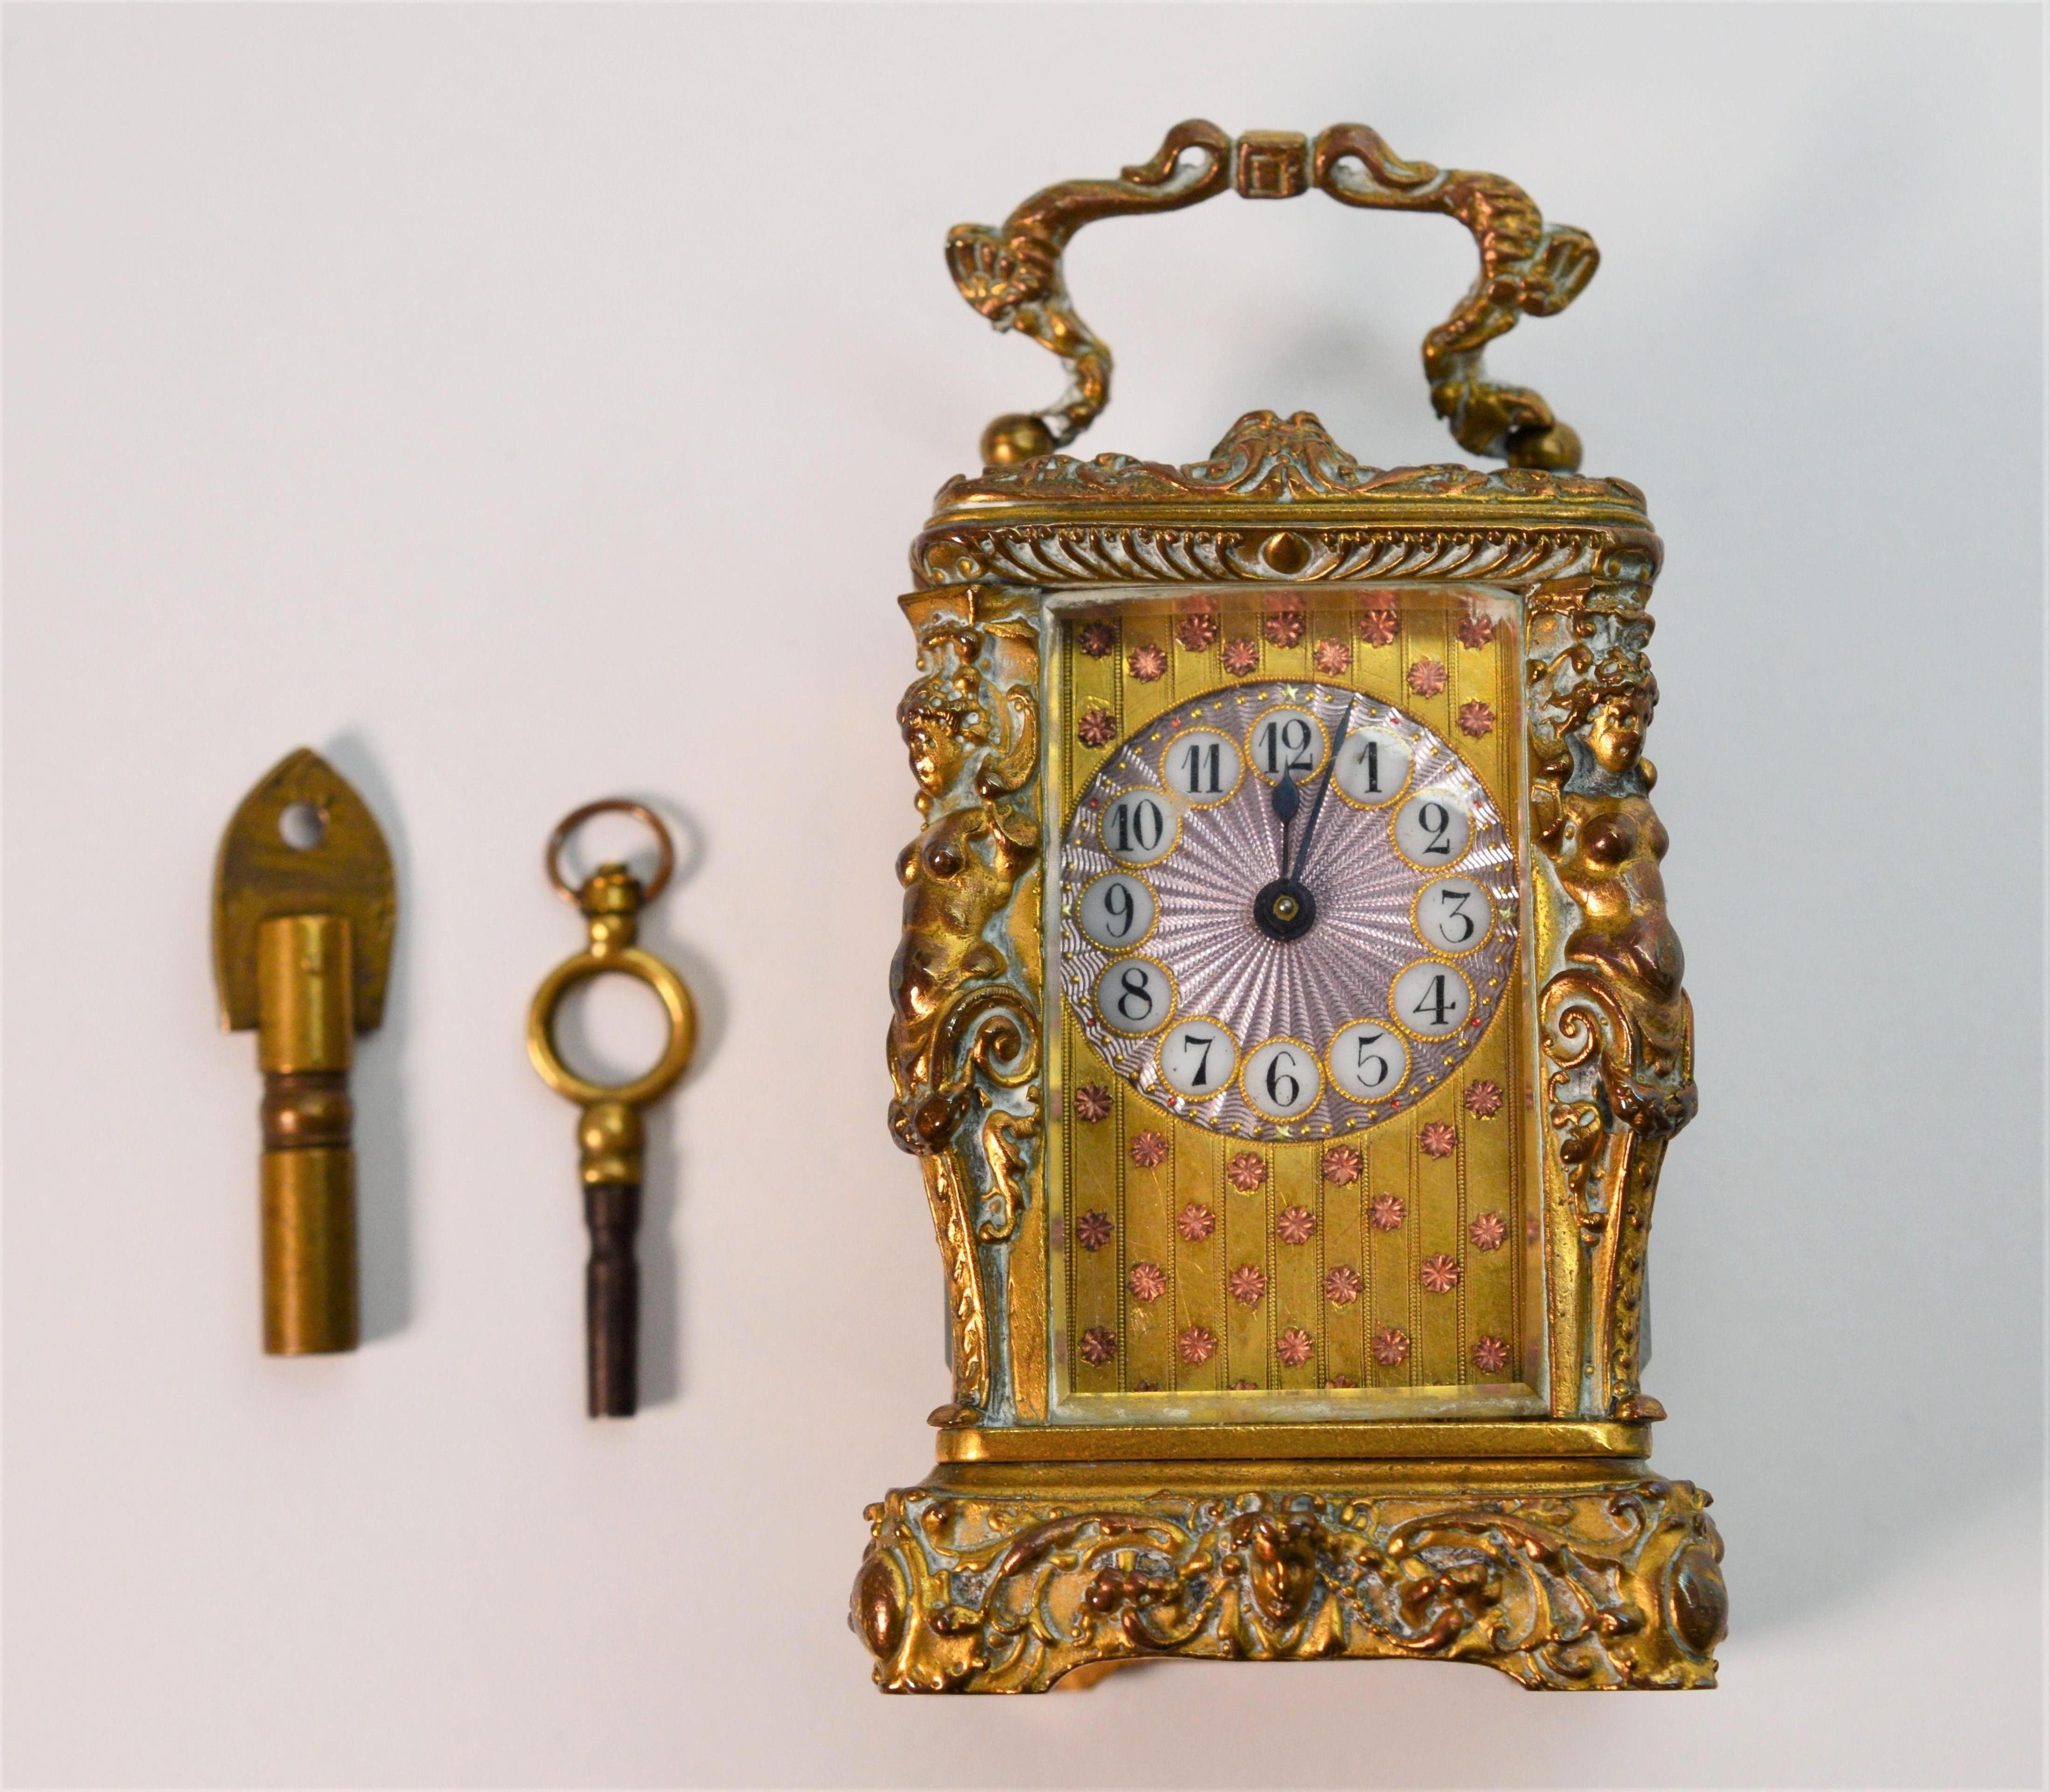 Charming heirloom vanity piece made by one of Europe finest clock maker's . This adorable gilded brass antique miniature L'Epee Carriage Clock measures 
2-1/2 inches high x 1-1/2 W x 1-1/2 deep. Made in France, the face has pink guilloche enamel